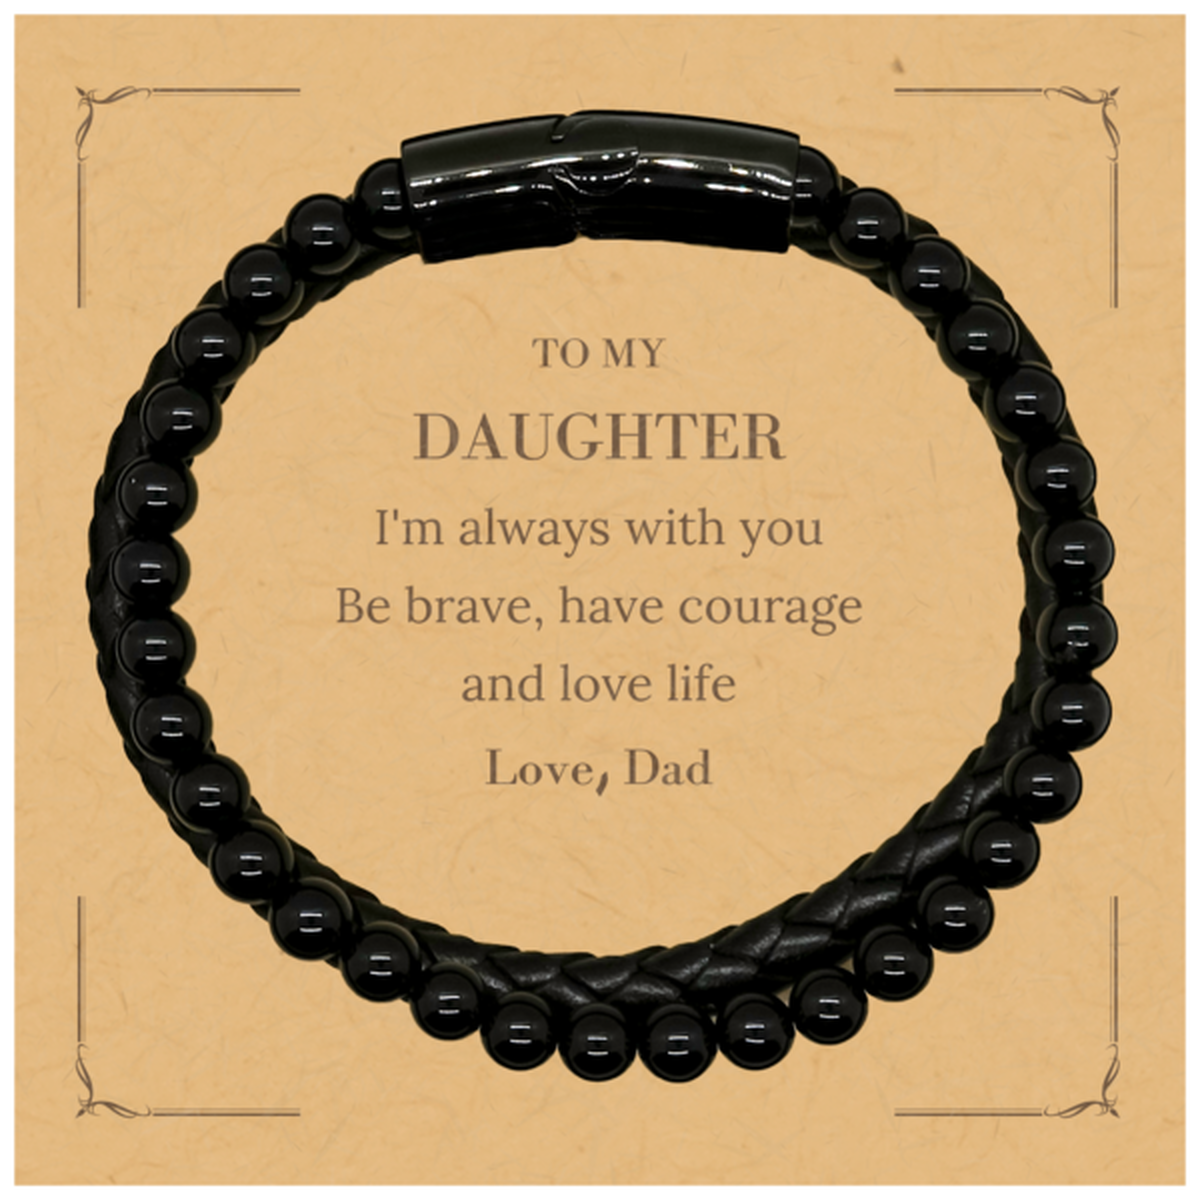 To My Daughter Gifts from Dad, Unique Stone Leather Bracelets Inspirational Christmas Birthday Graduation Gifts for Daughter I'm always with you. Be brave, have courage and love life. Love, Dad